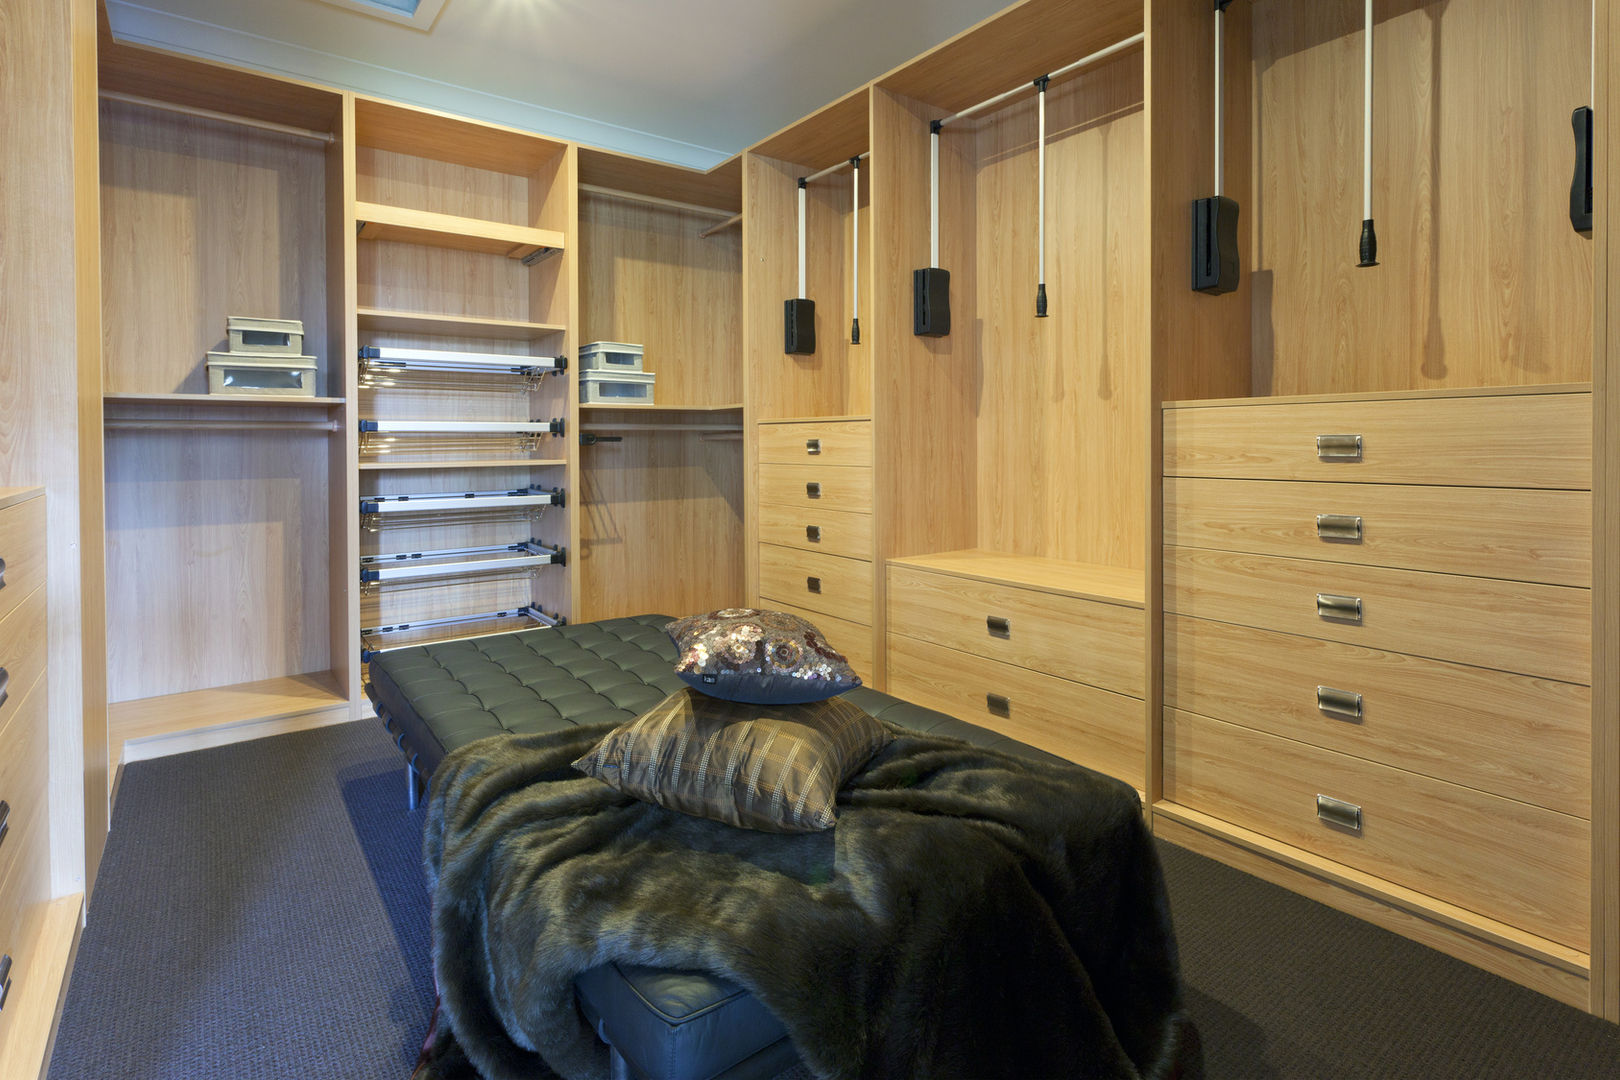 Walk in Wardrobes, Piwko-Bespoke Fitted Furniture Piwko-Bespoke Fitted Furniture Dressing classique Armoires et commodes